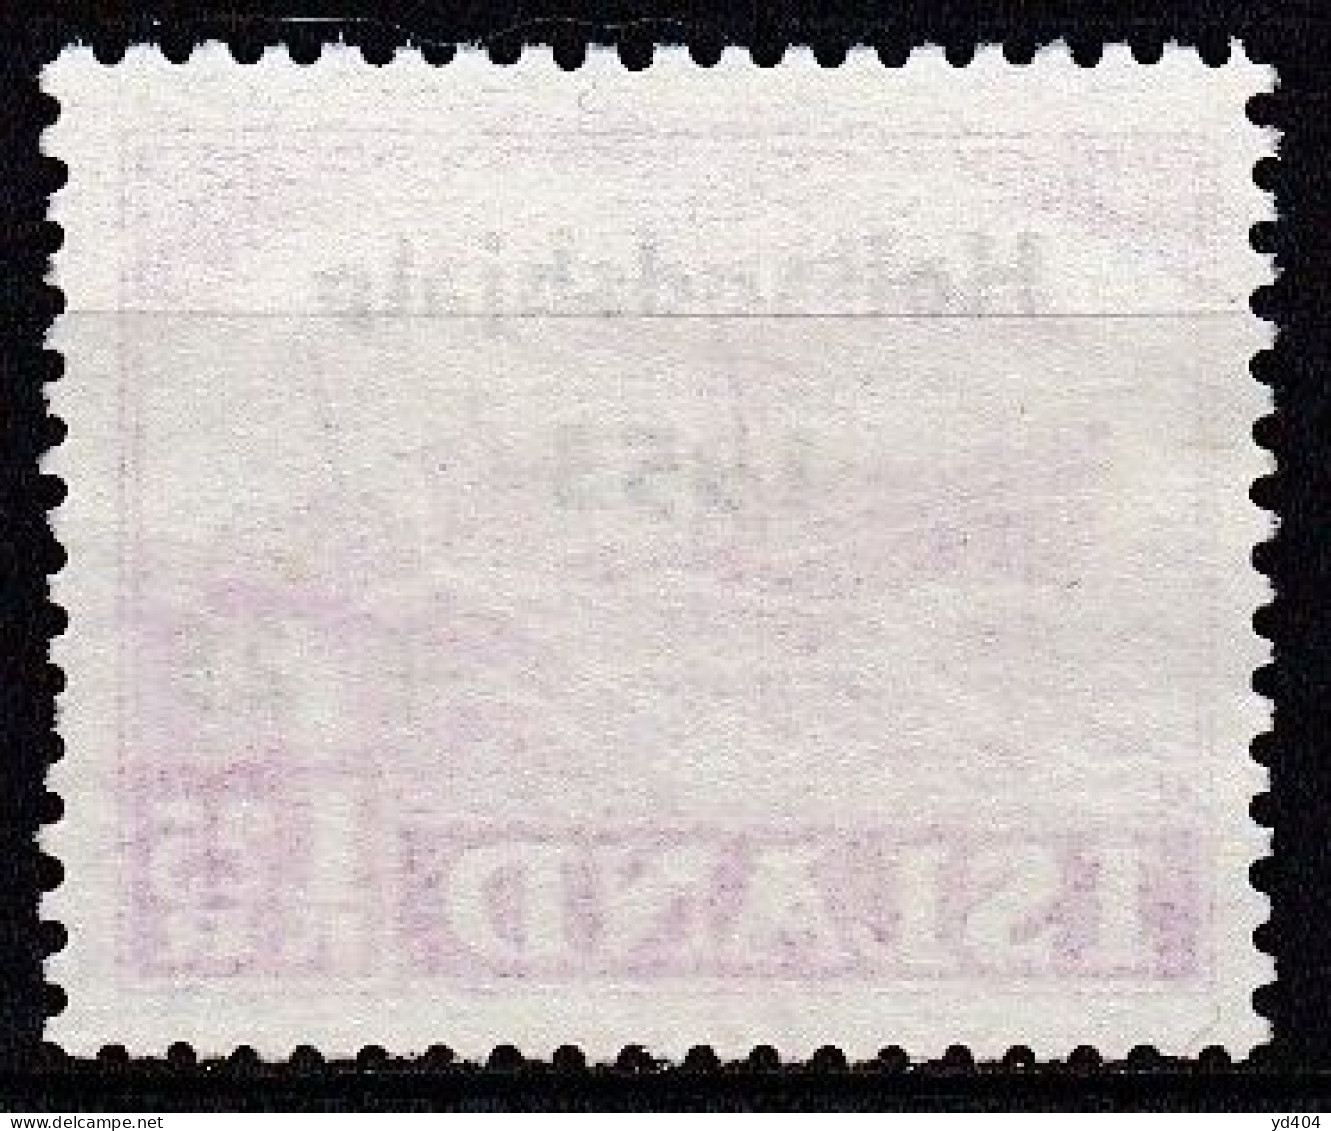 IS056B – ISLANDE – ICELAND – 1953 – RELIEF FUND FOR NETHERLANDS – SC # B13 USED - Used Stamps